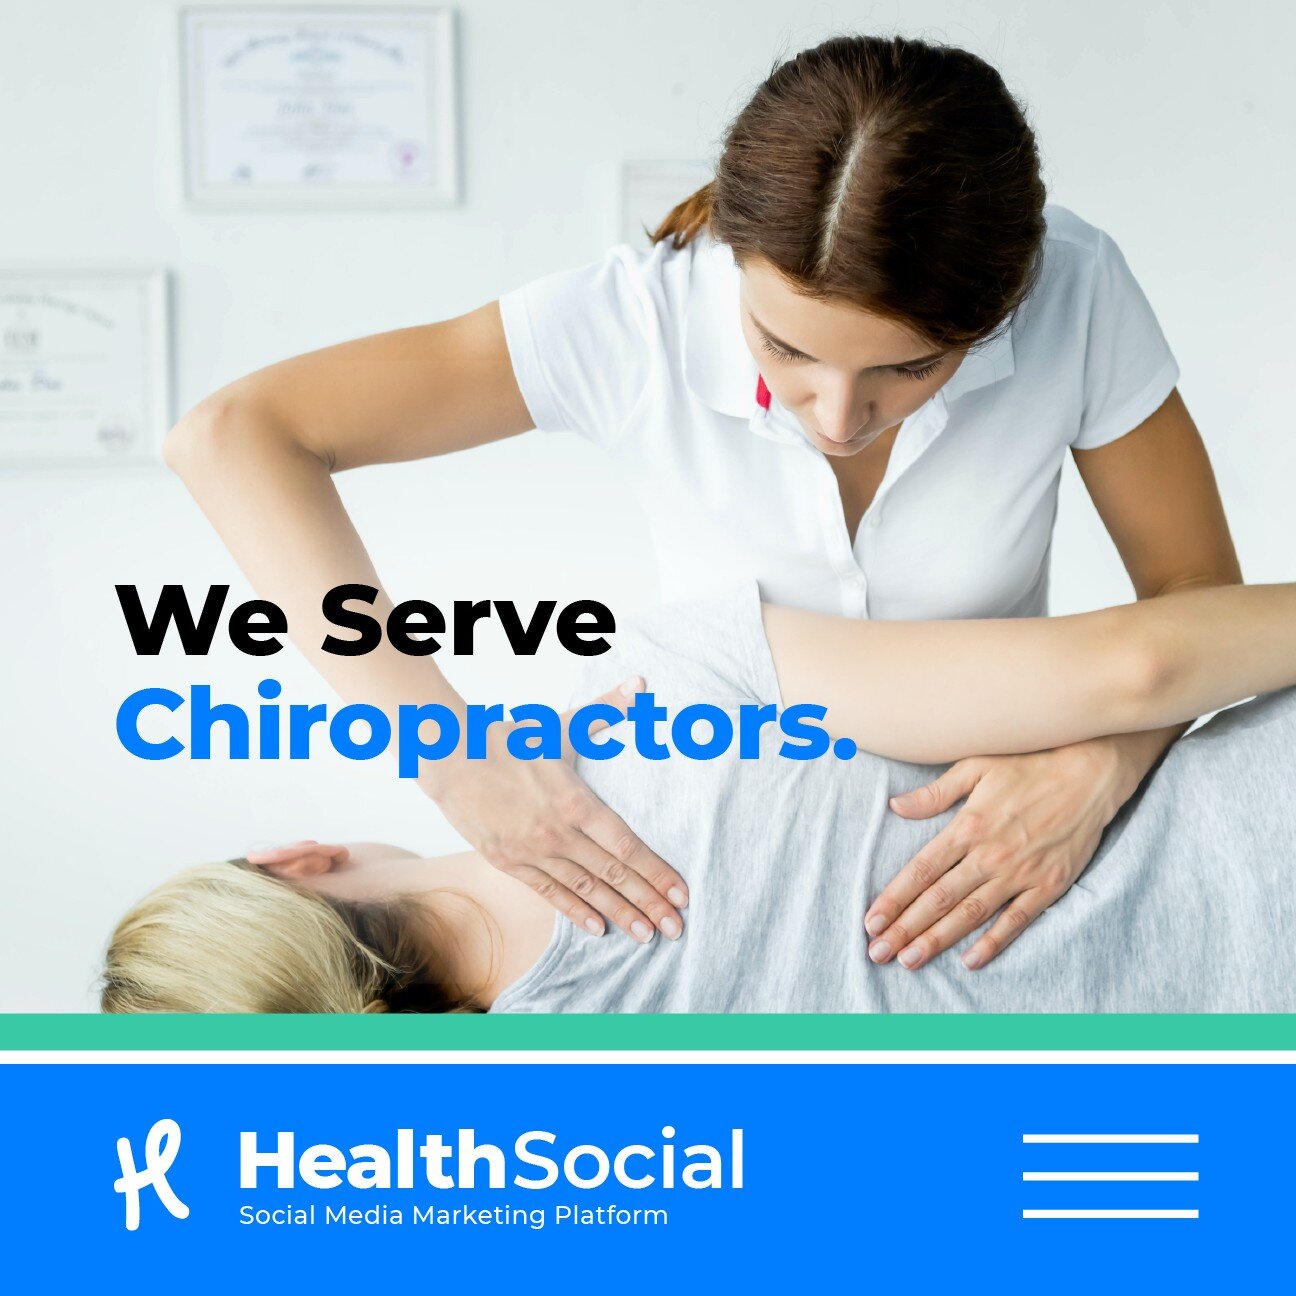 CHIROPRACTORS, WE'D LOVE TO SERVE YOU!

There are unique challenges to maintaining a great practice. We understand that time management can make or break your service and customer retention. That's precisely why after years of working with physicians